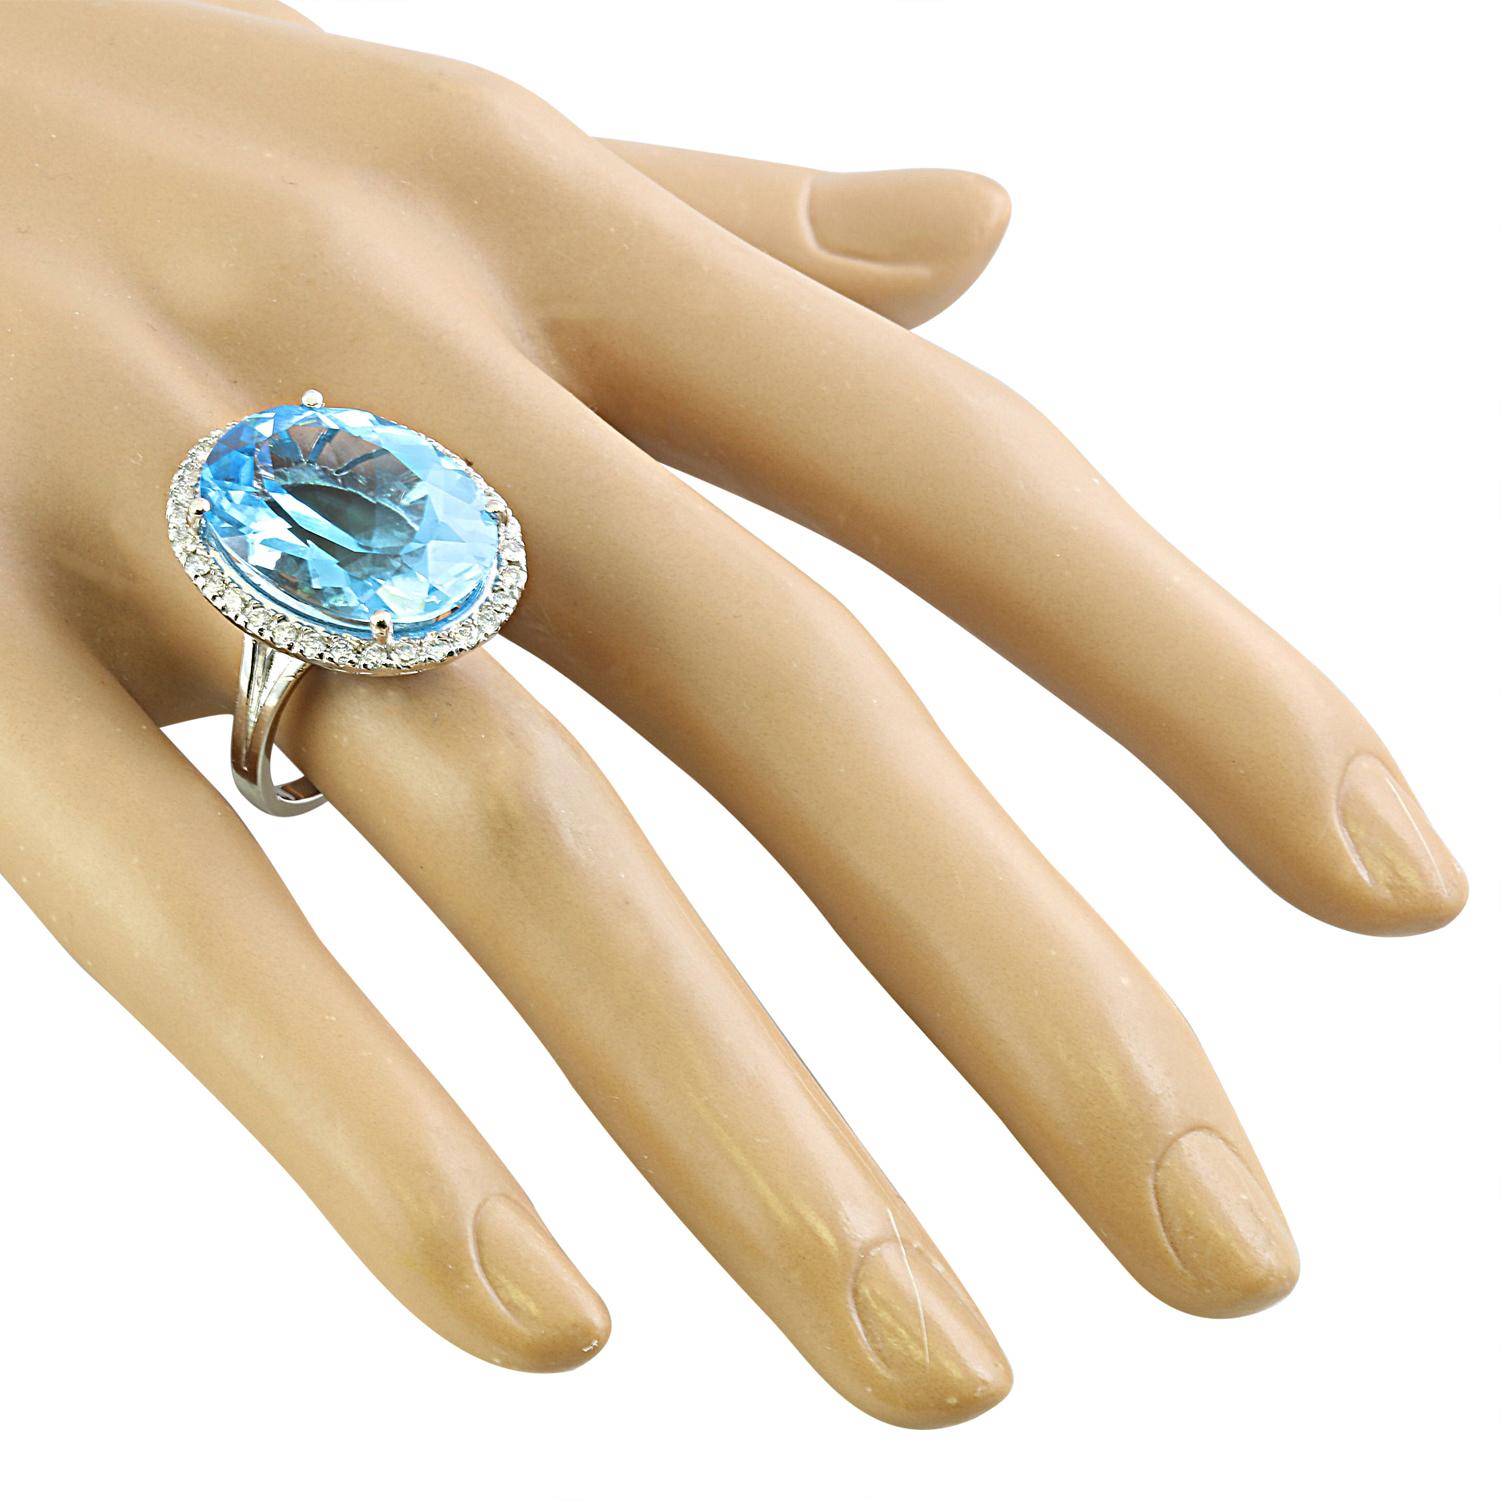 Radiant Blue Sparkle: Swiss Blue Topaz Diamond Ring in 14K Solid White Gold In New Condition For Sale In Los Angeles, CA